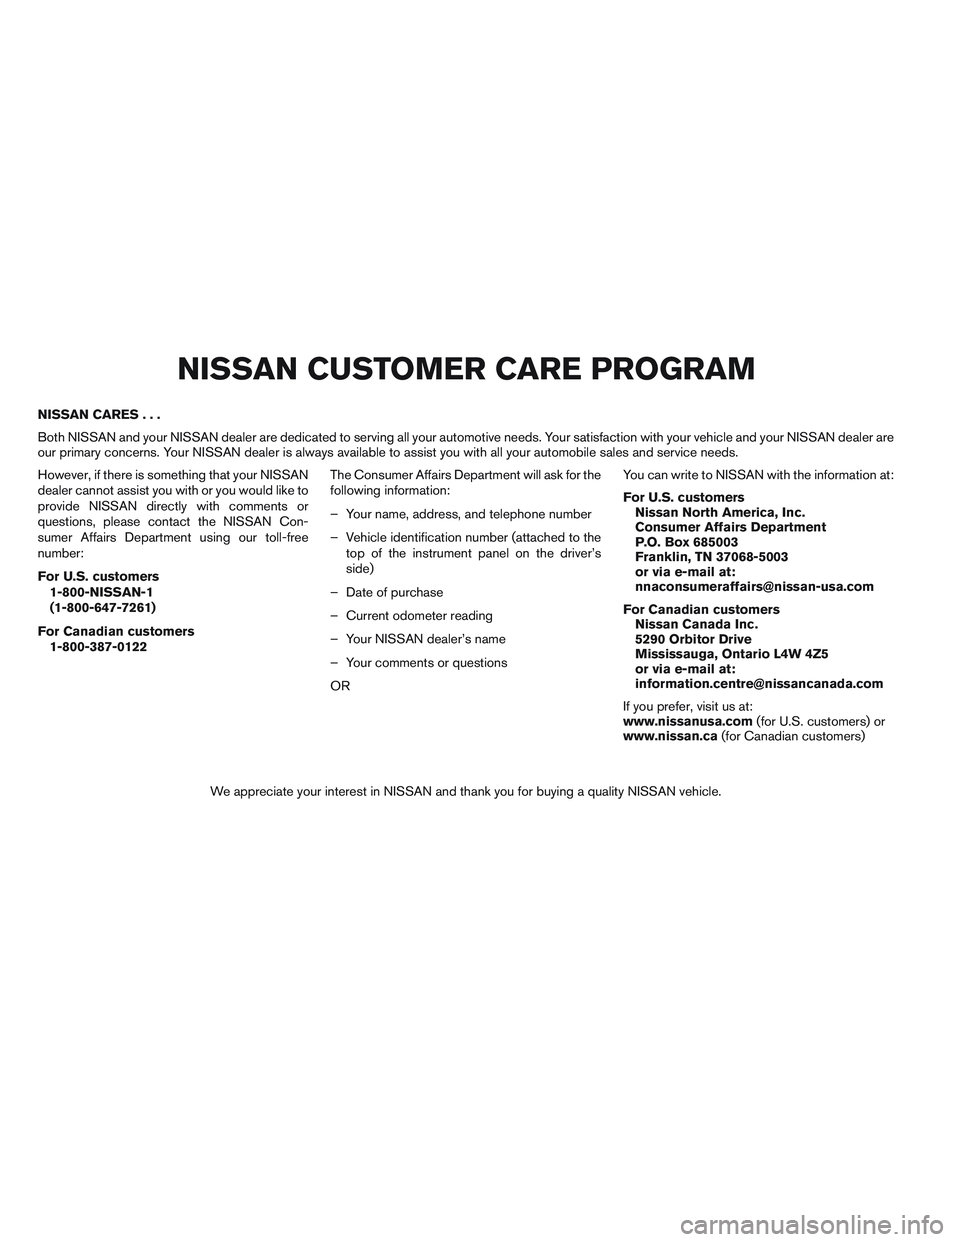 NISSAN VERSA 2013  Owners Manual NISSAN CARES...
Both NISSAN and your NISSAN dealer are dedicated to serving all your automotive needs. Your satisfaction with your vehicle and your NISSAN dealer are
our primary concerns. Your NISSAN 